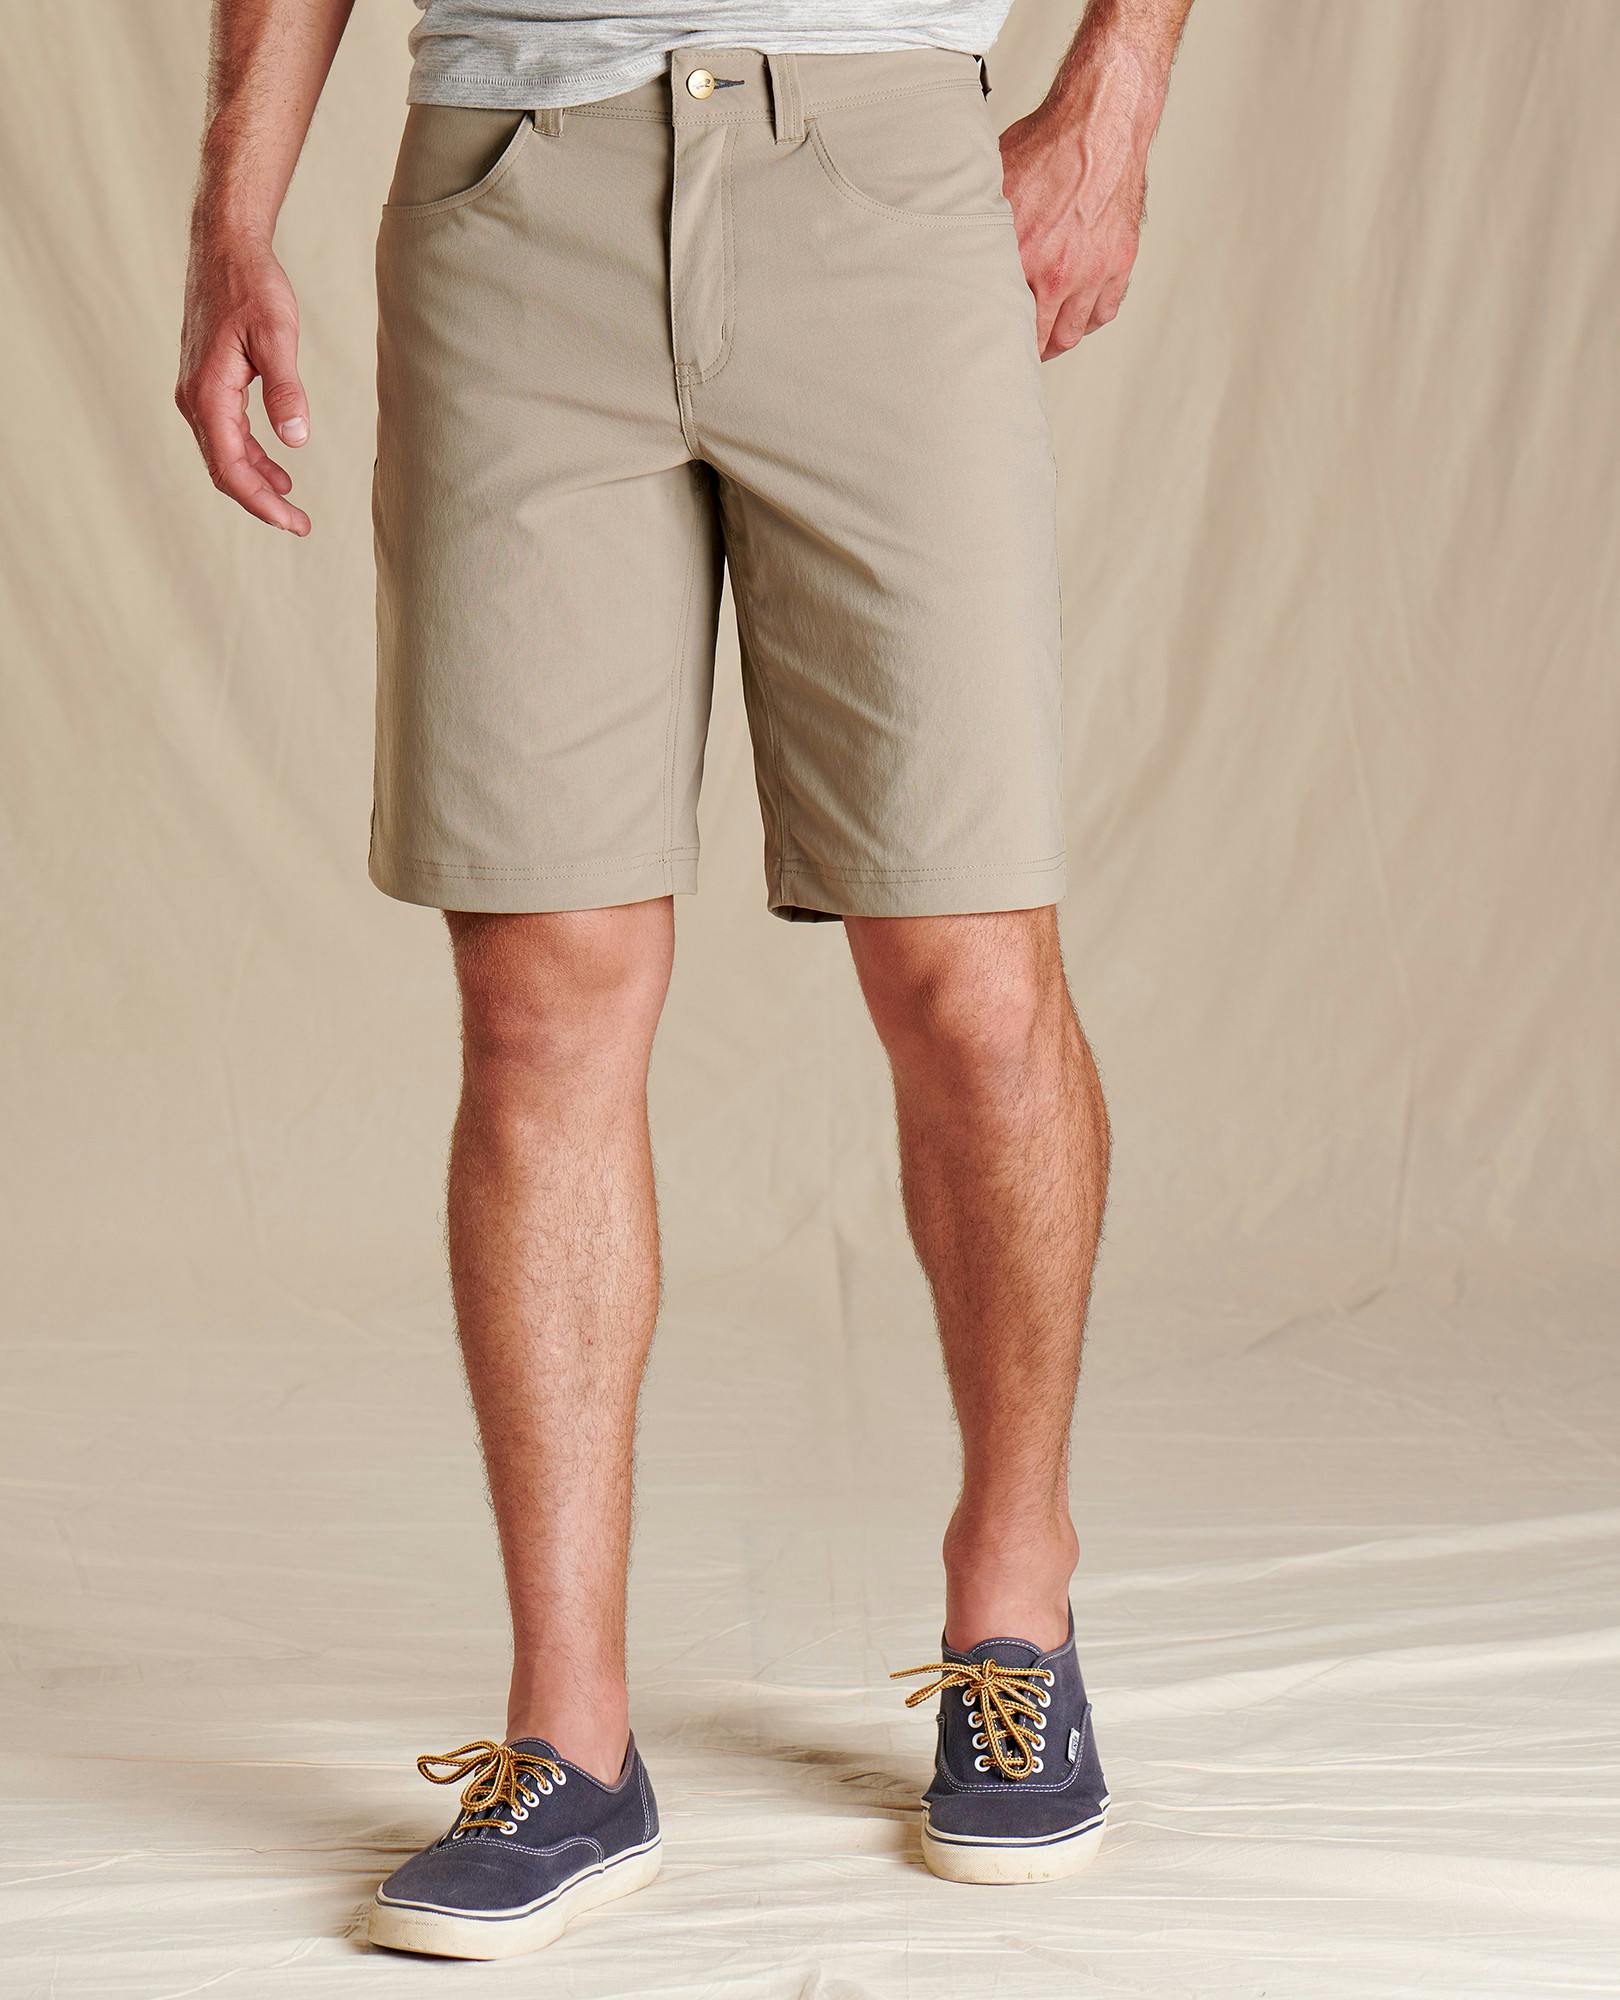 Toad&Co - ROVER CANVAS SHORT M - 32 - Dark Chino